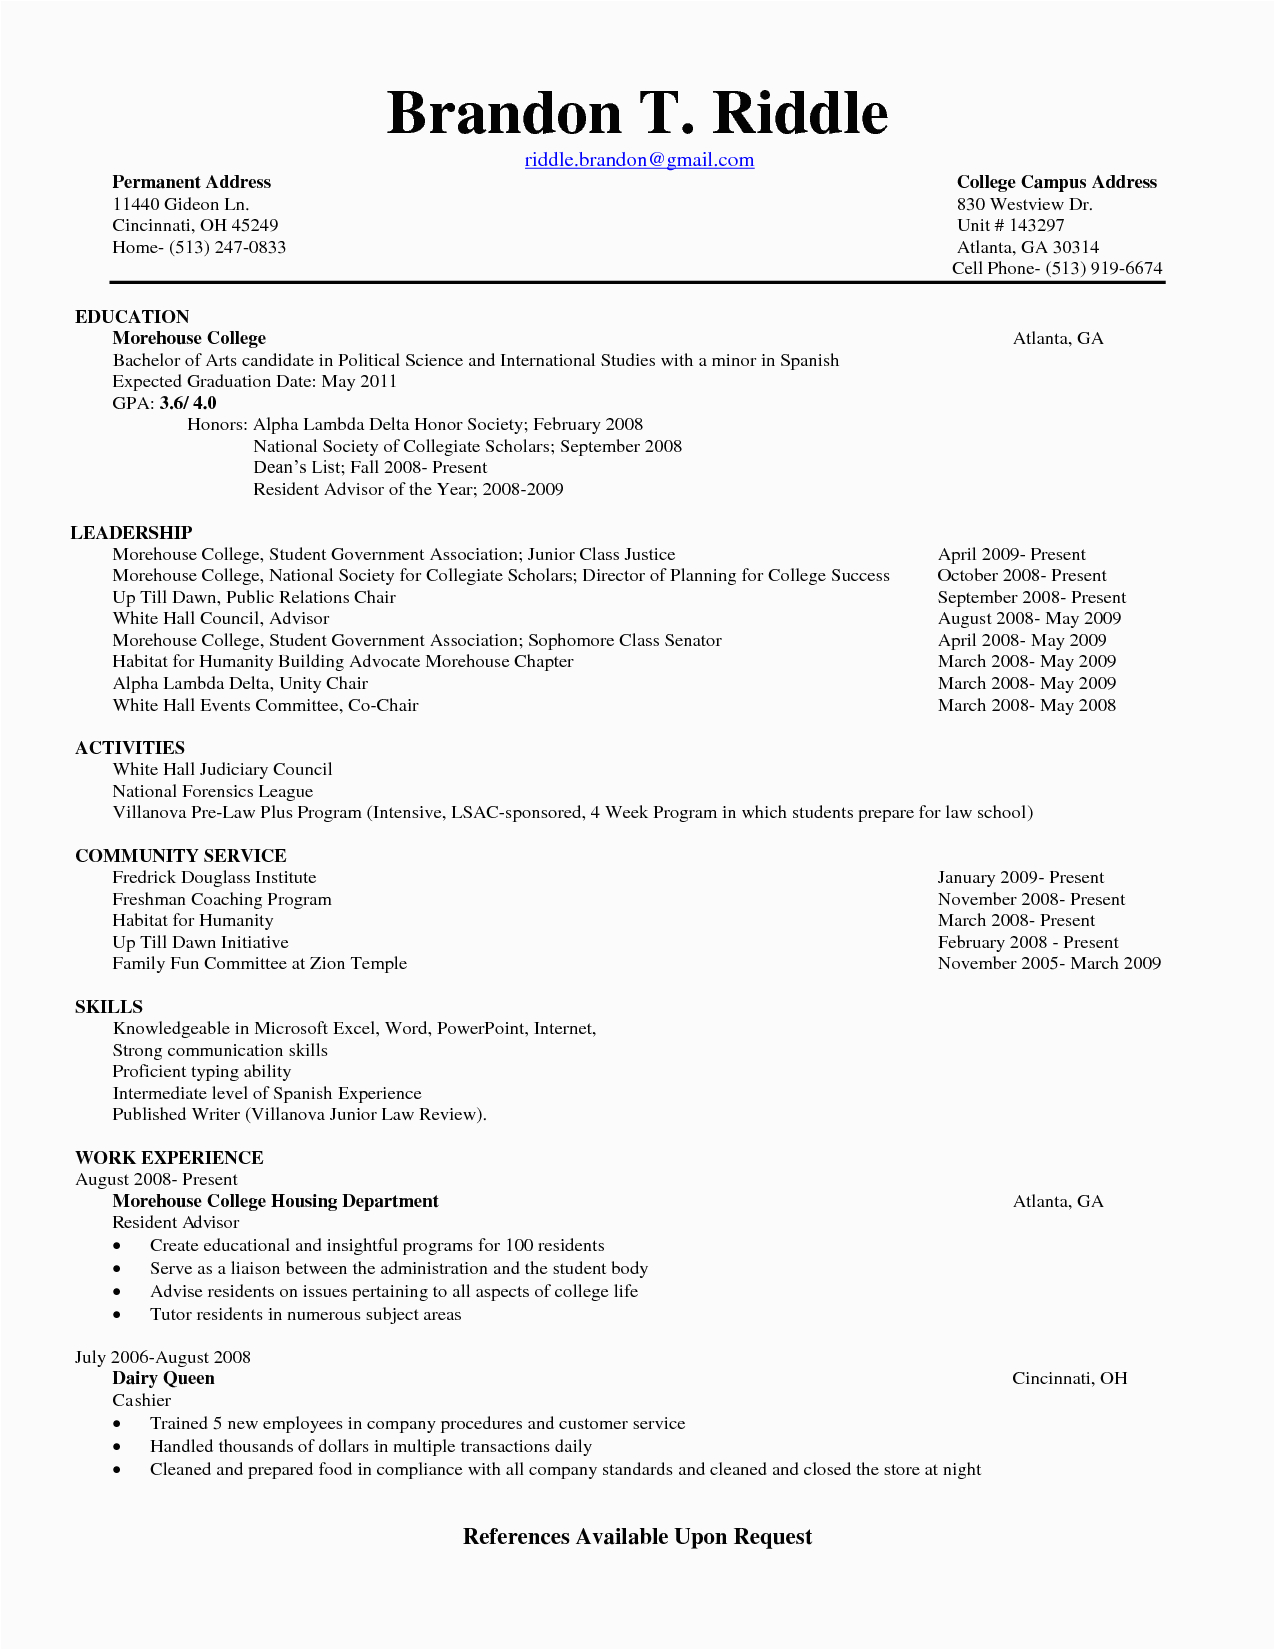 Resume Right Out Of College Samples College Freshman Resume Template Google Search